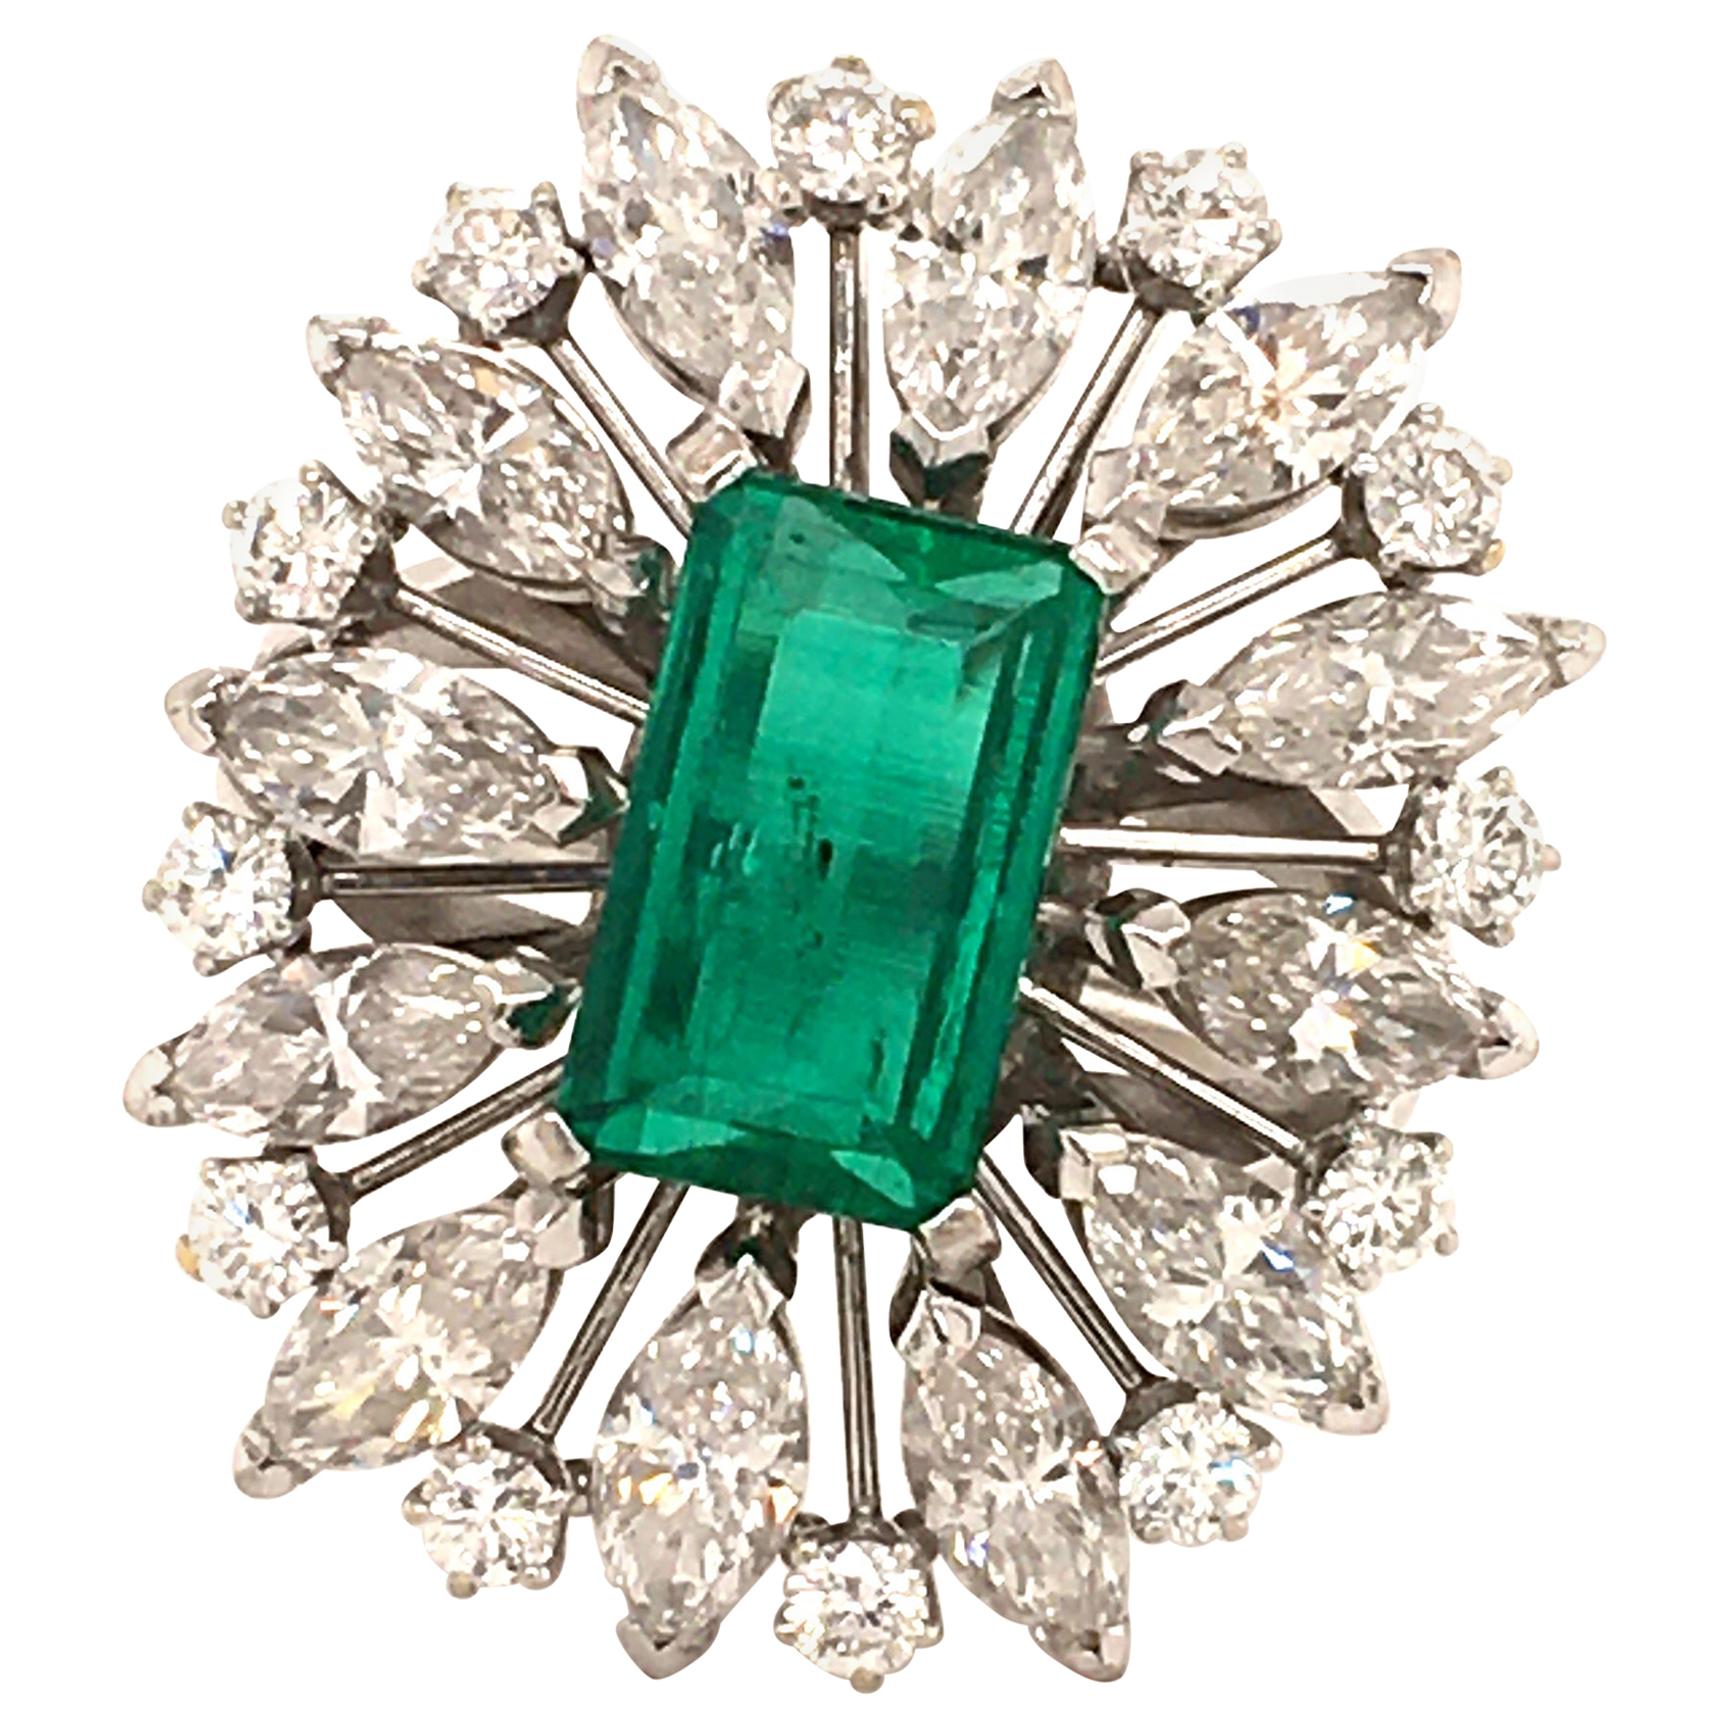 2.25 Carat Colombian Emerald and Diamond Ring in 18 Karat White Gold